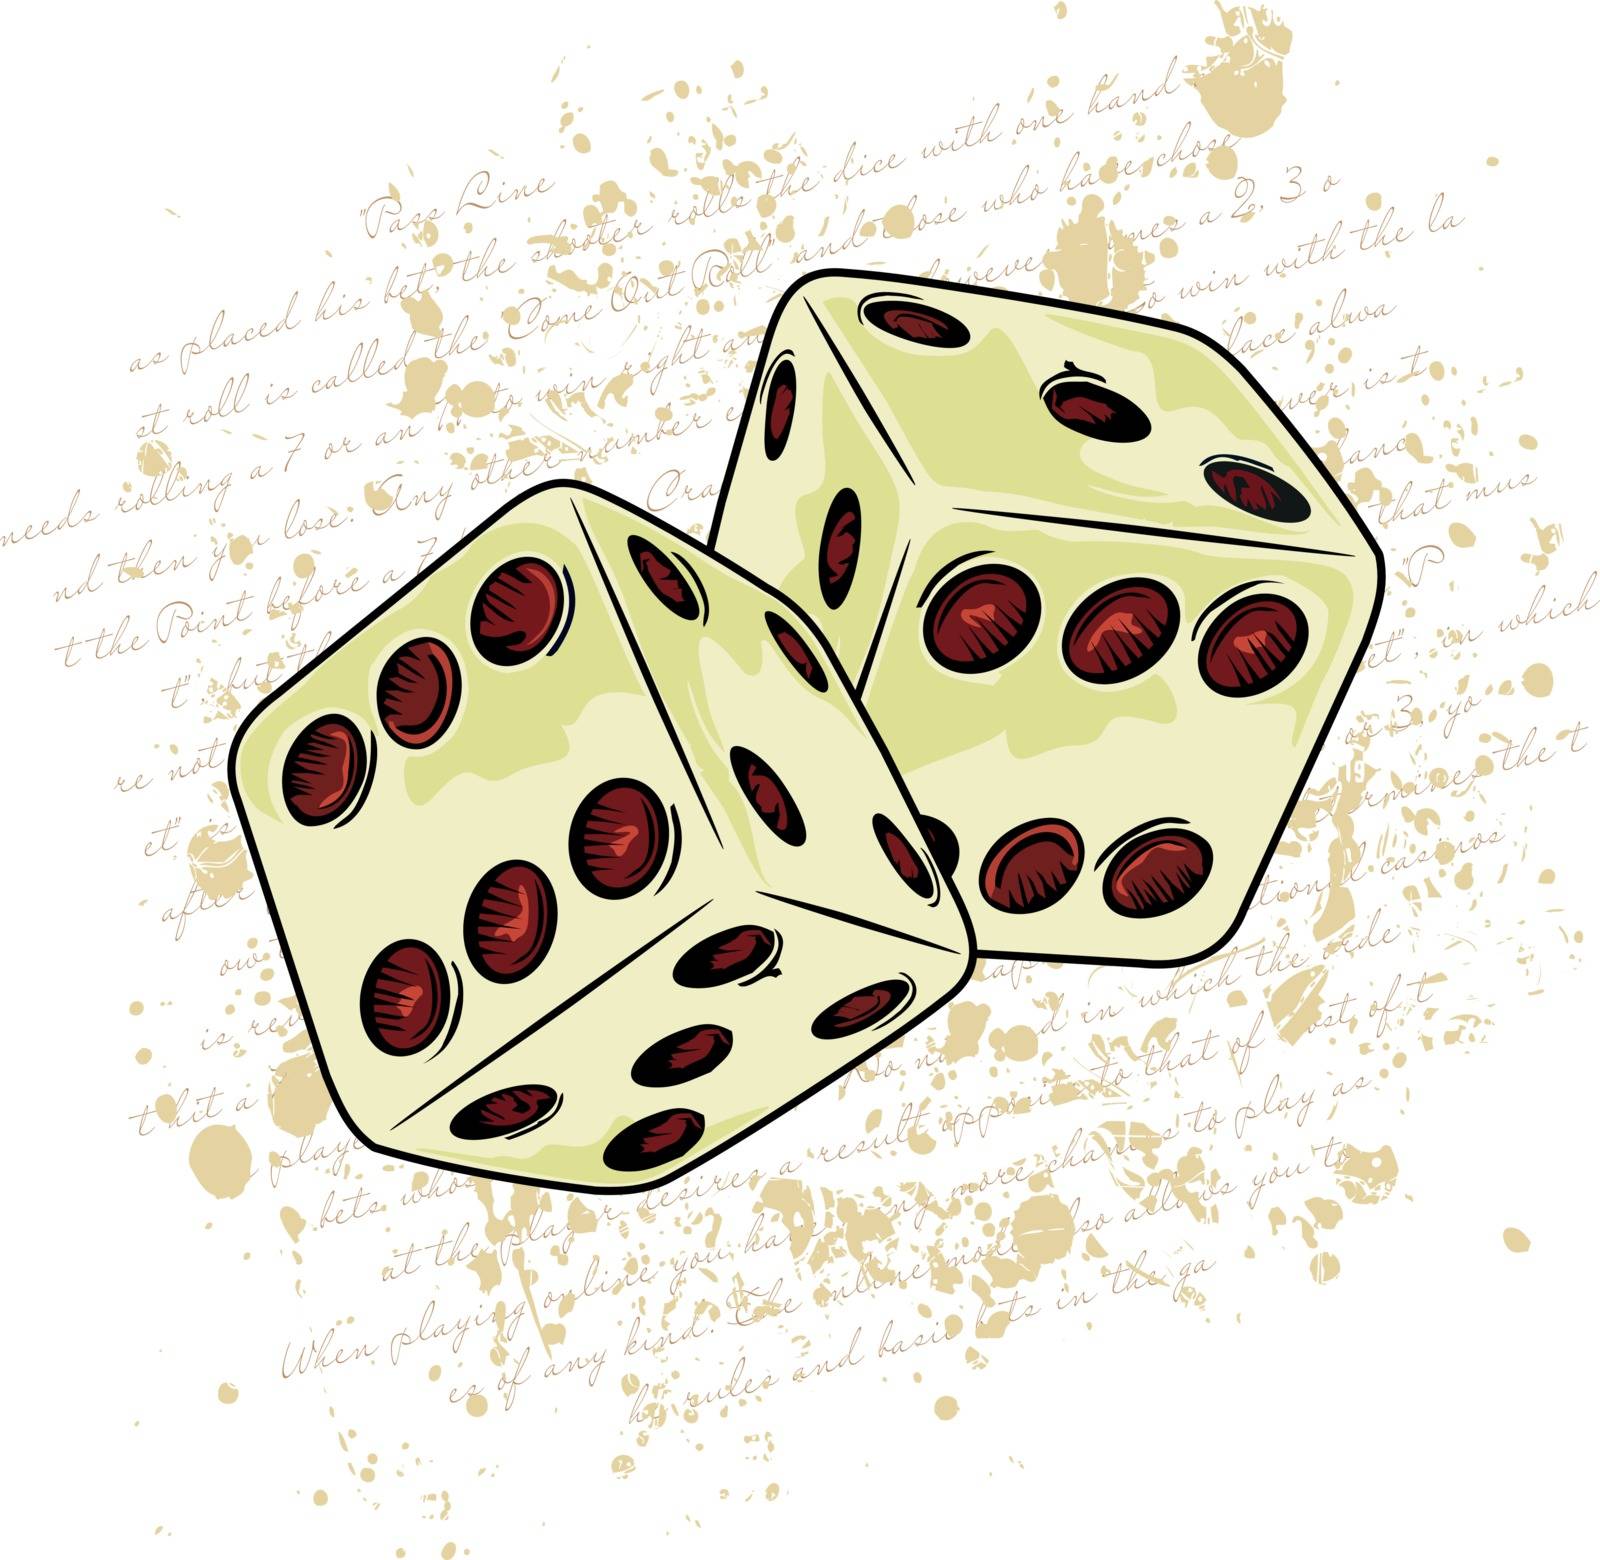 DICE by samandale